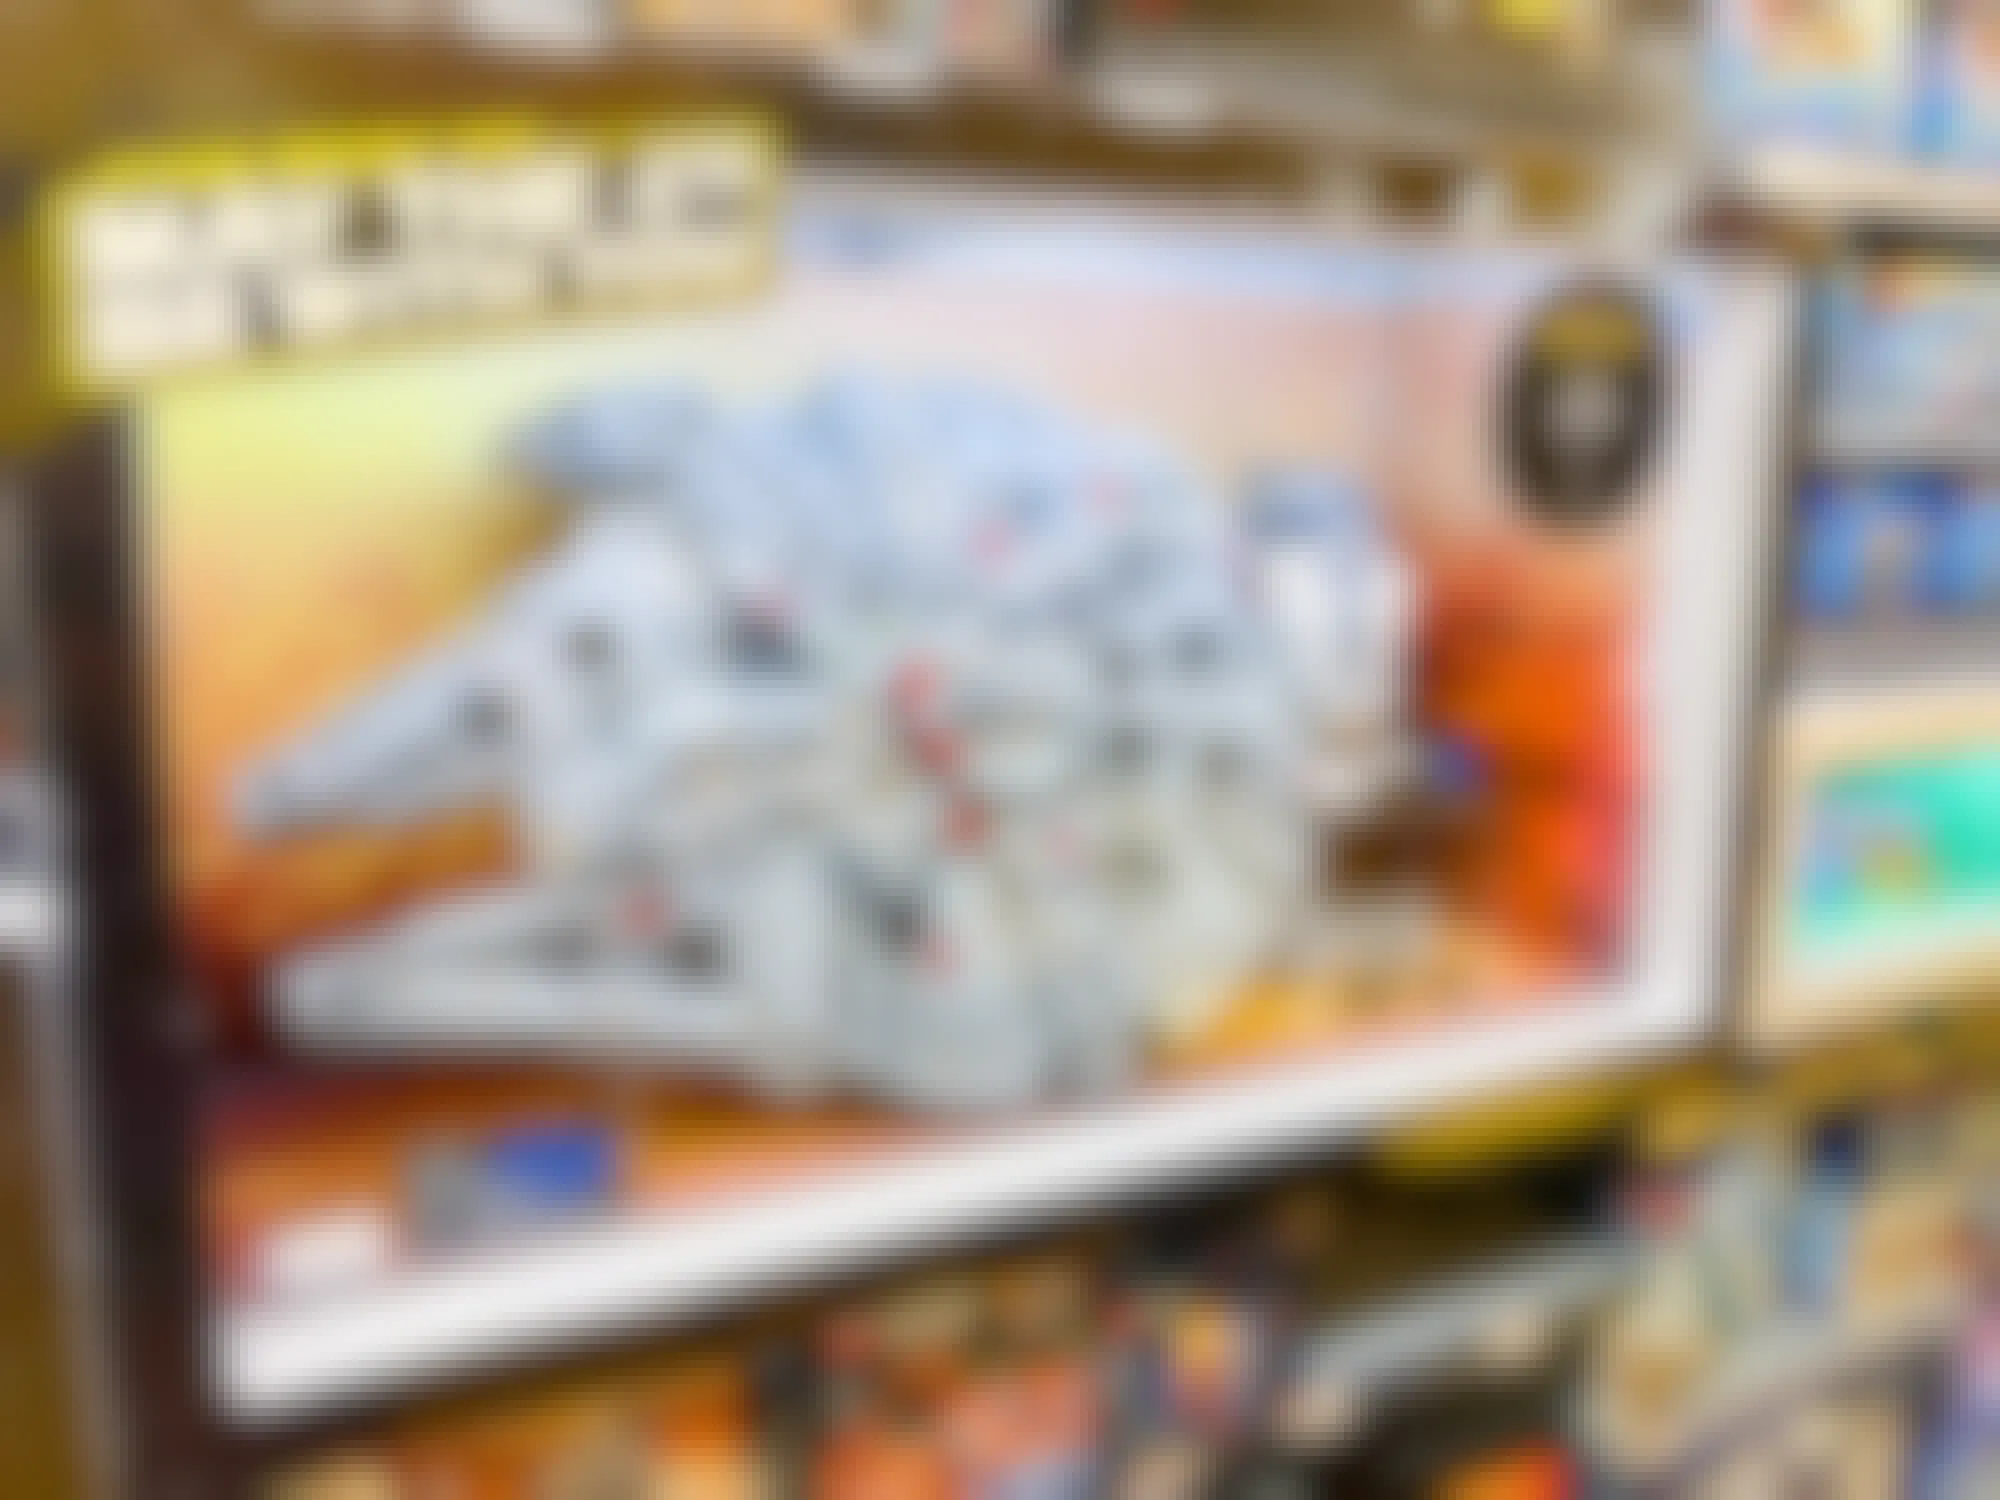 Star Wars Day Events Happening at Lego Stores This Week!